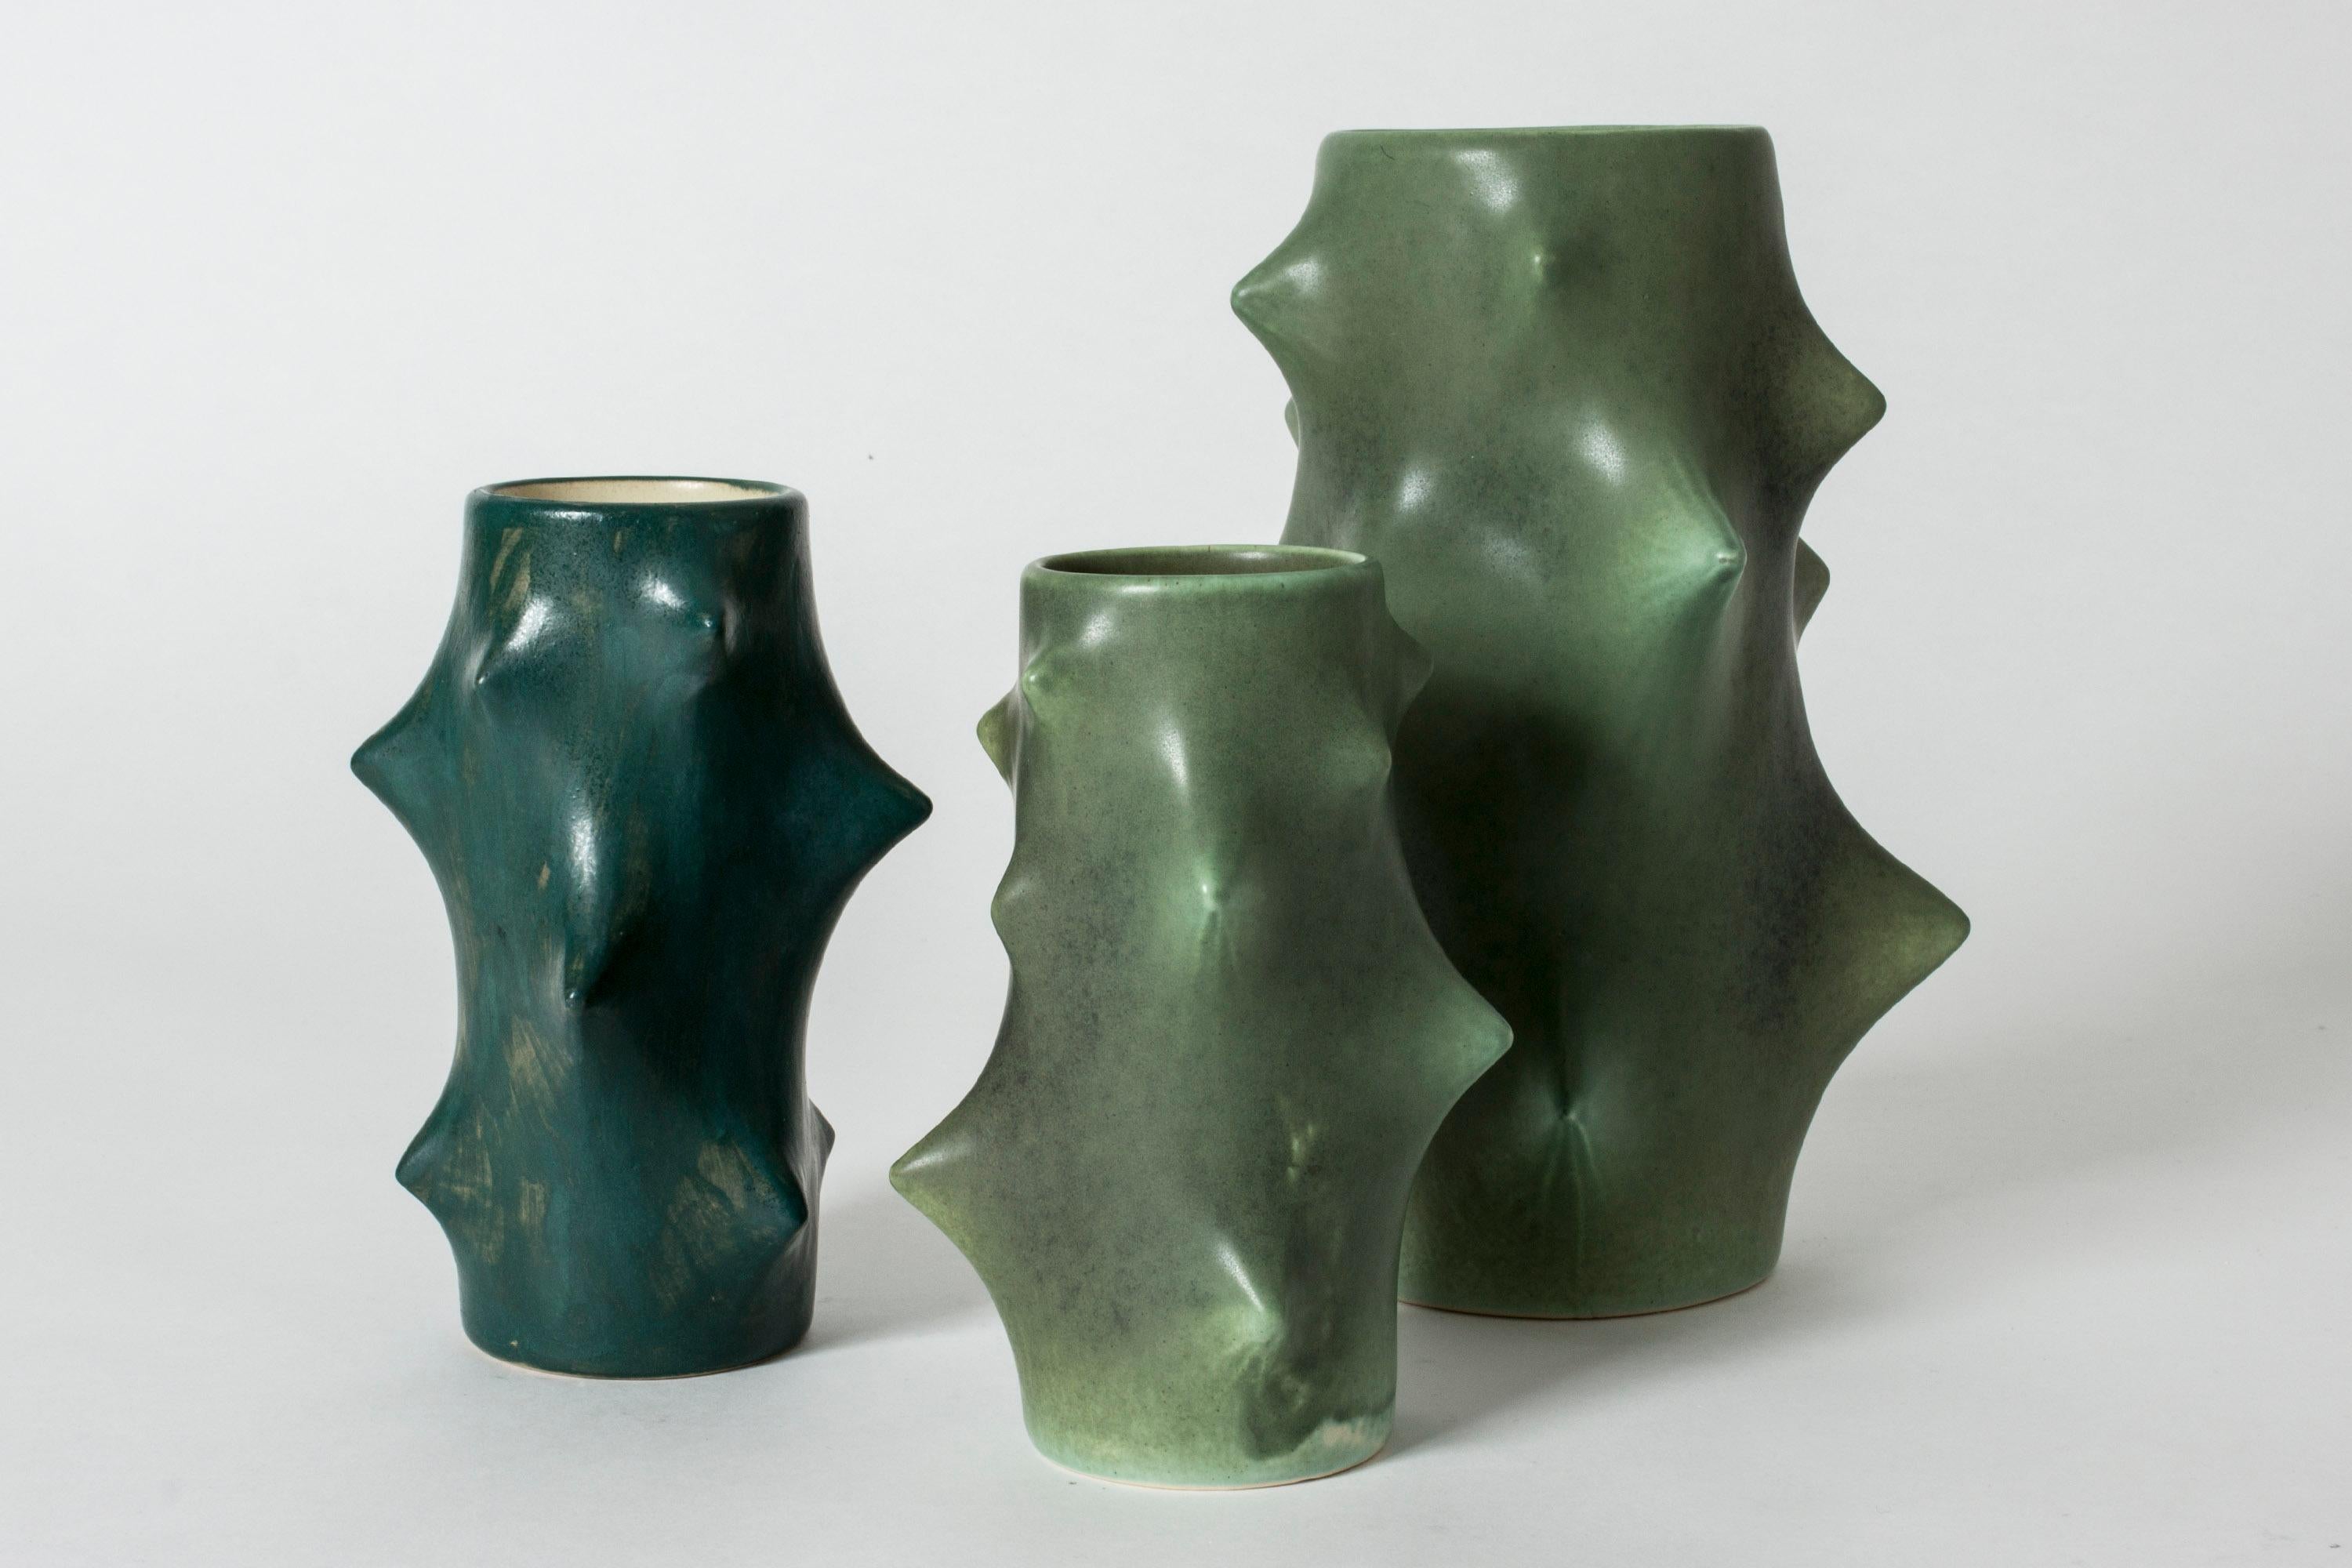 Set of three stoneware vases by Knud Basse, in shapes where points on the bodies are pressing outwards. Cactus-like forms, very decorative.

Measures: Height 26 / 18.5 / 17.5 cm
Diameter 18 / 12 cm.